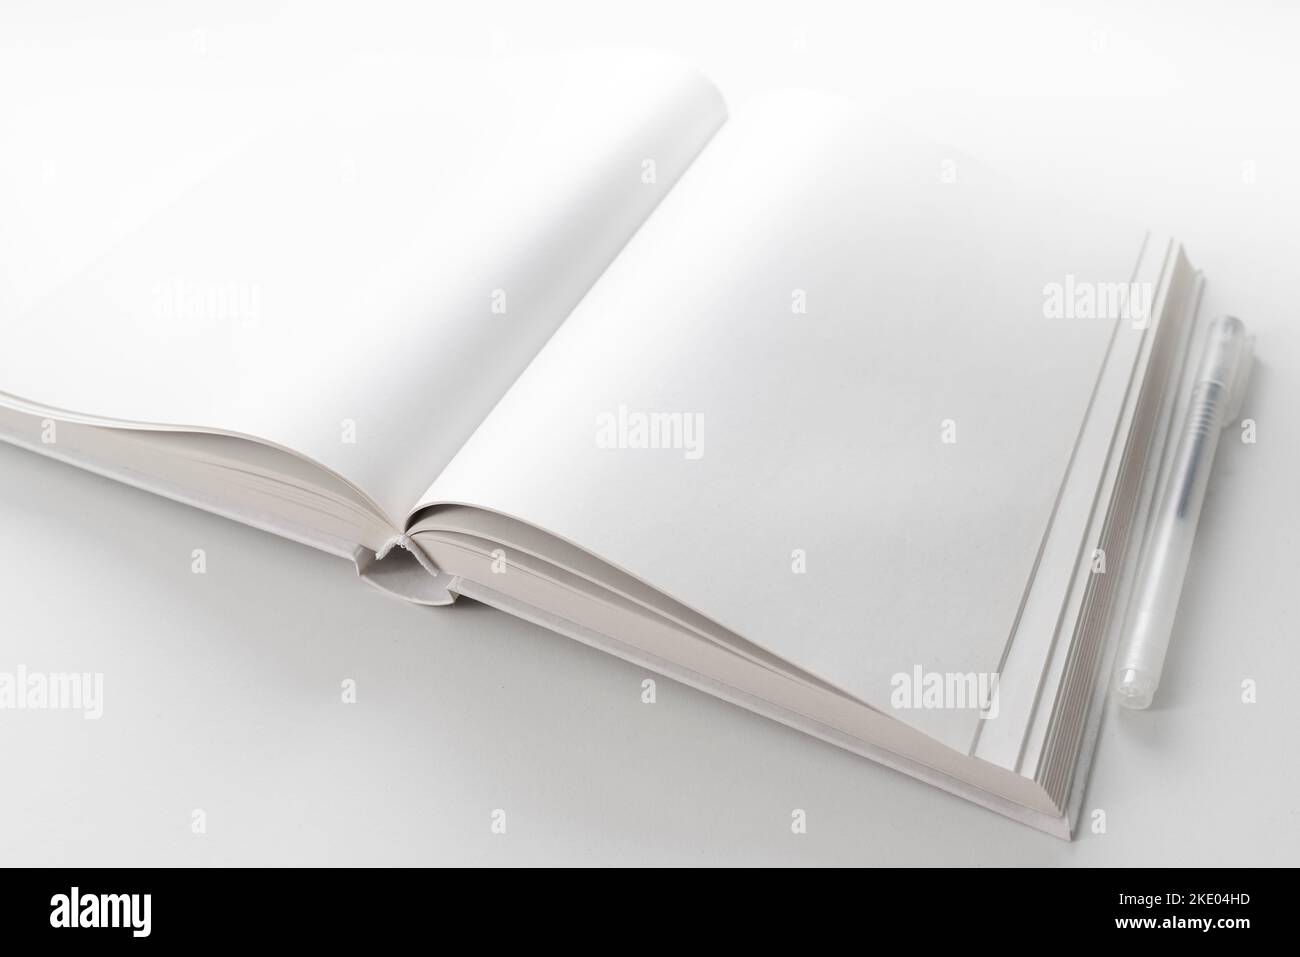 high angle view of open book with blank white pages on white desk with pen Stock Photo